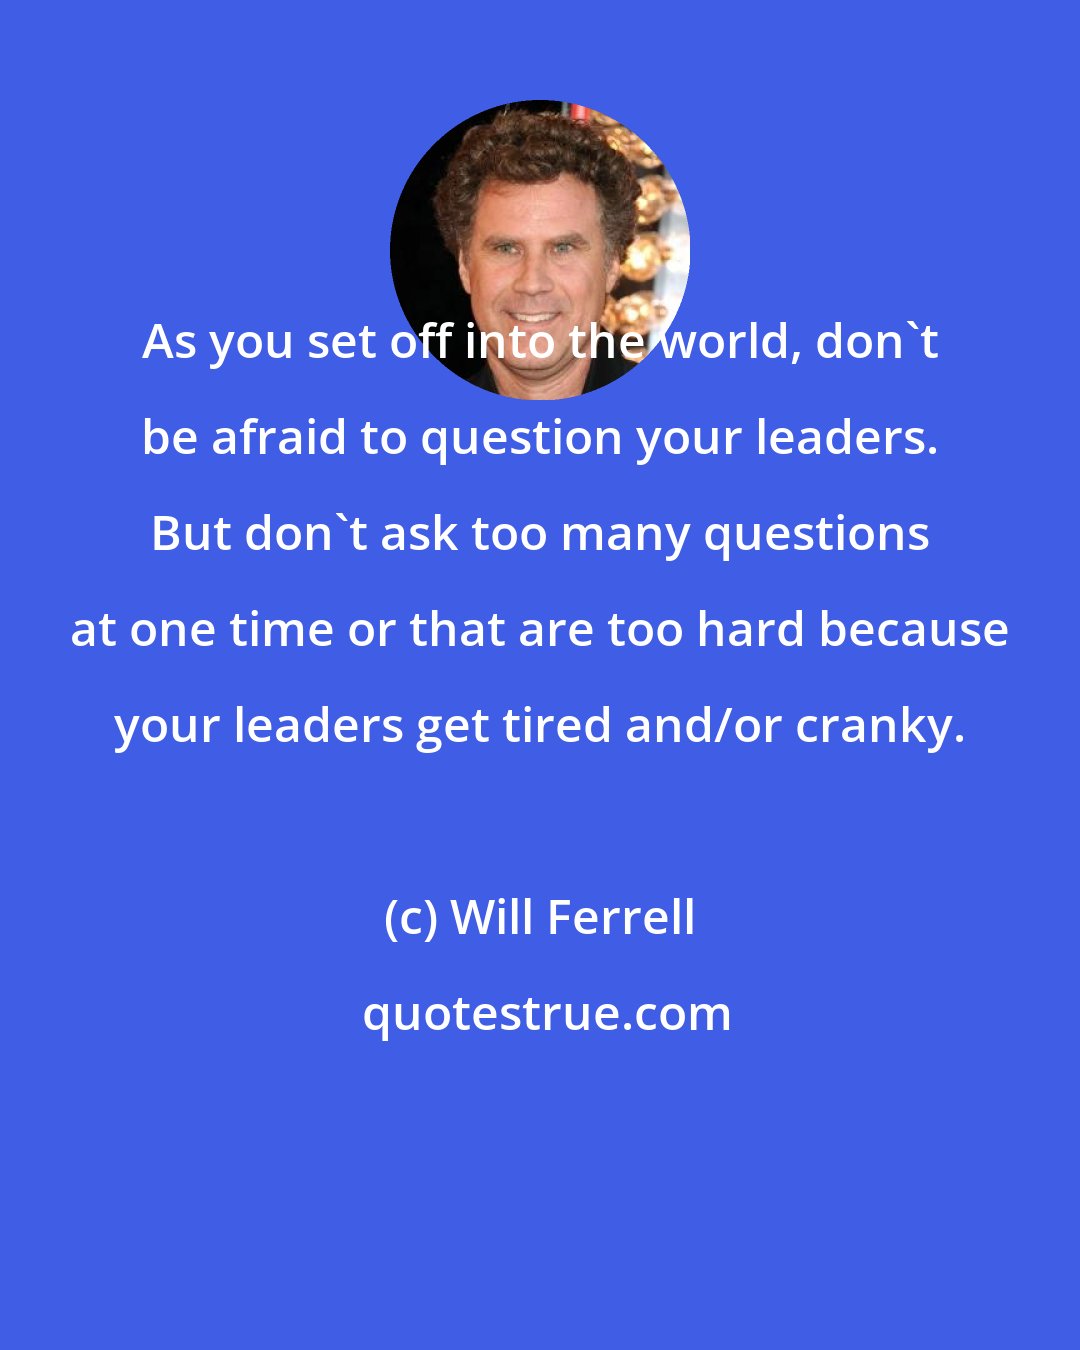 Will Ferrell: As you set off into the world, don't be afraid to question your leaders. But don't ask too many questions at one time or that are too hard because your leaders get tired and/or cranky.